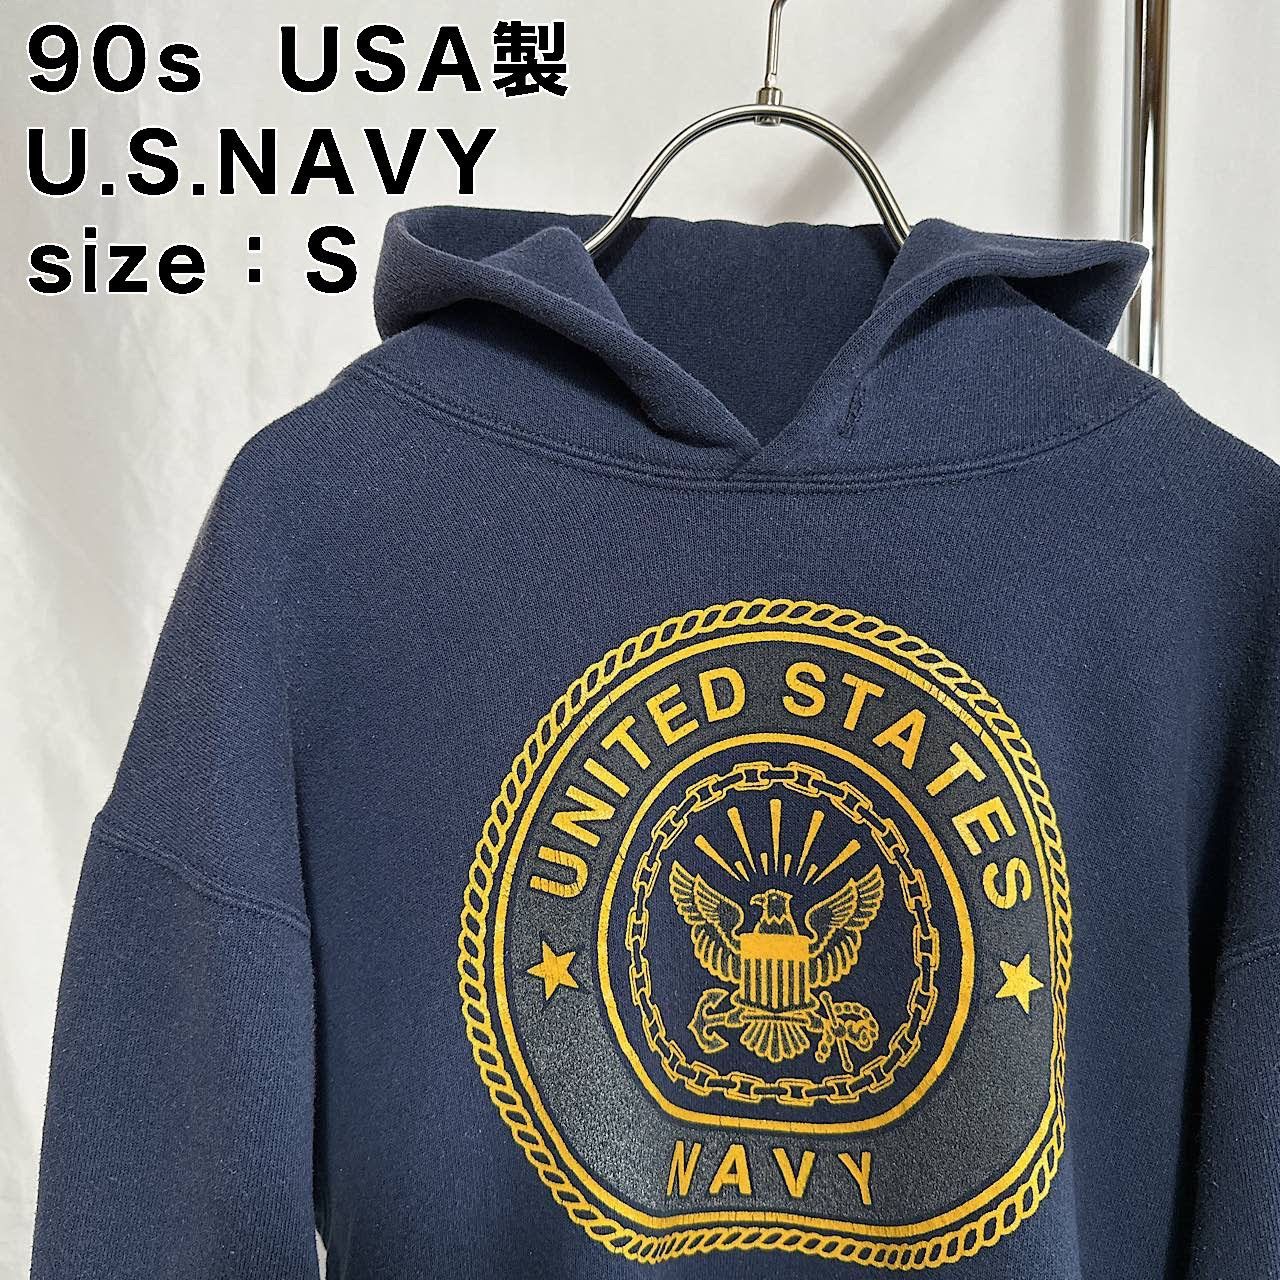 90s USA製 size：S U.S.NAVY 両面プリント スウェット パーカー 古着 